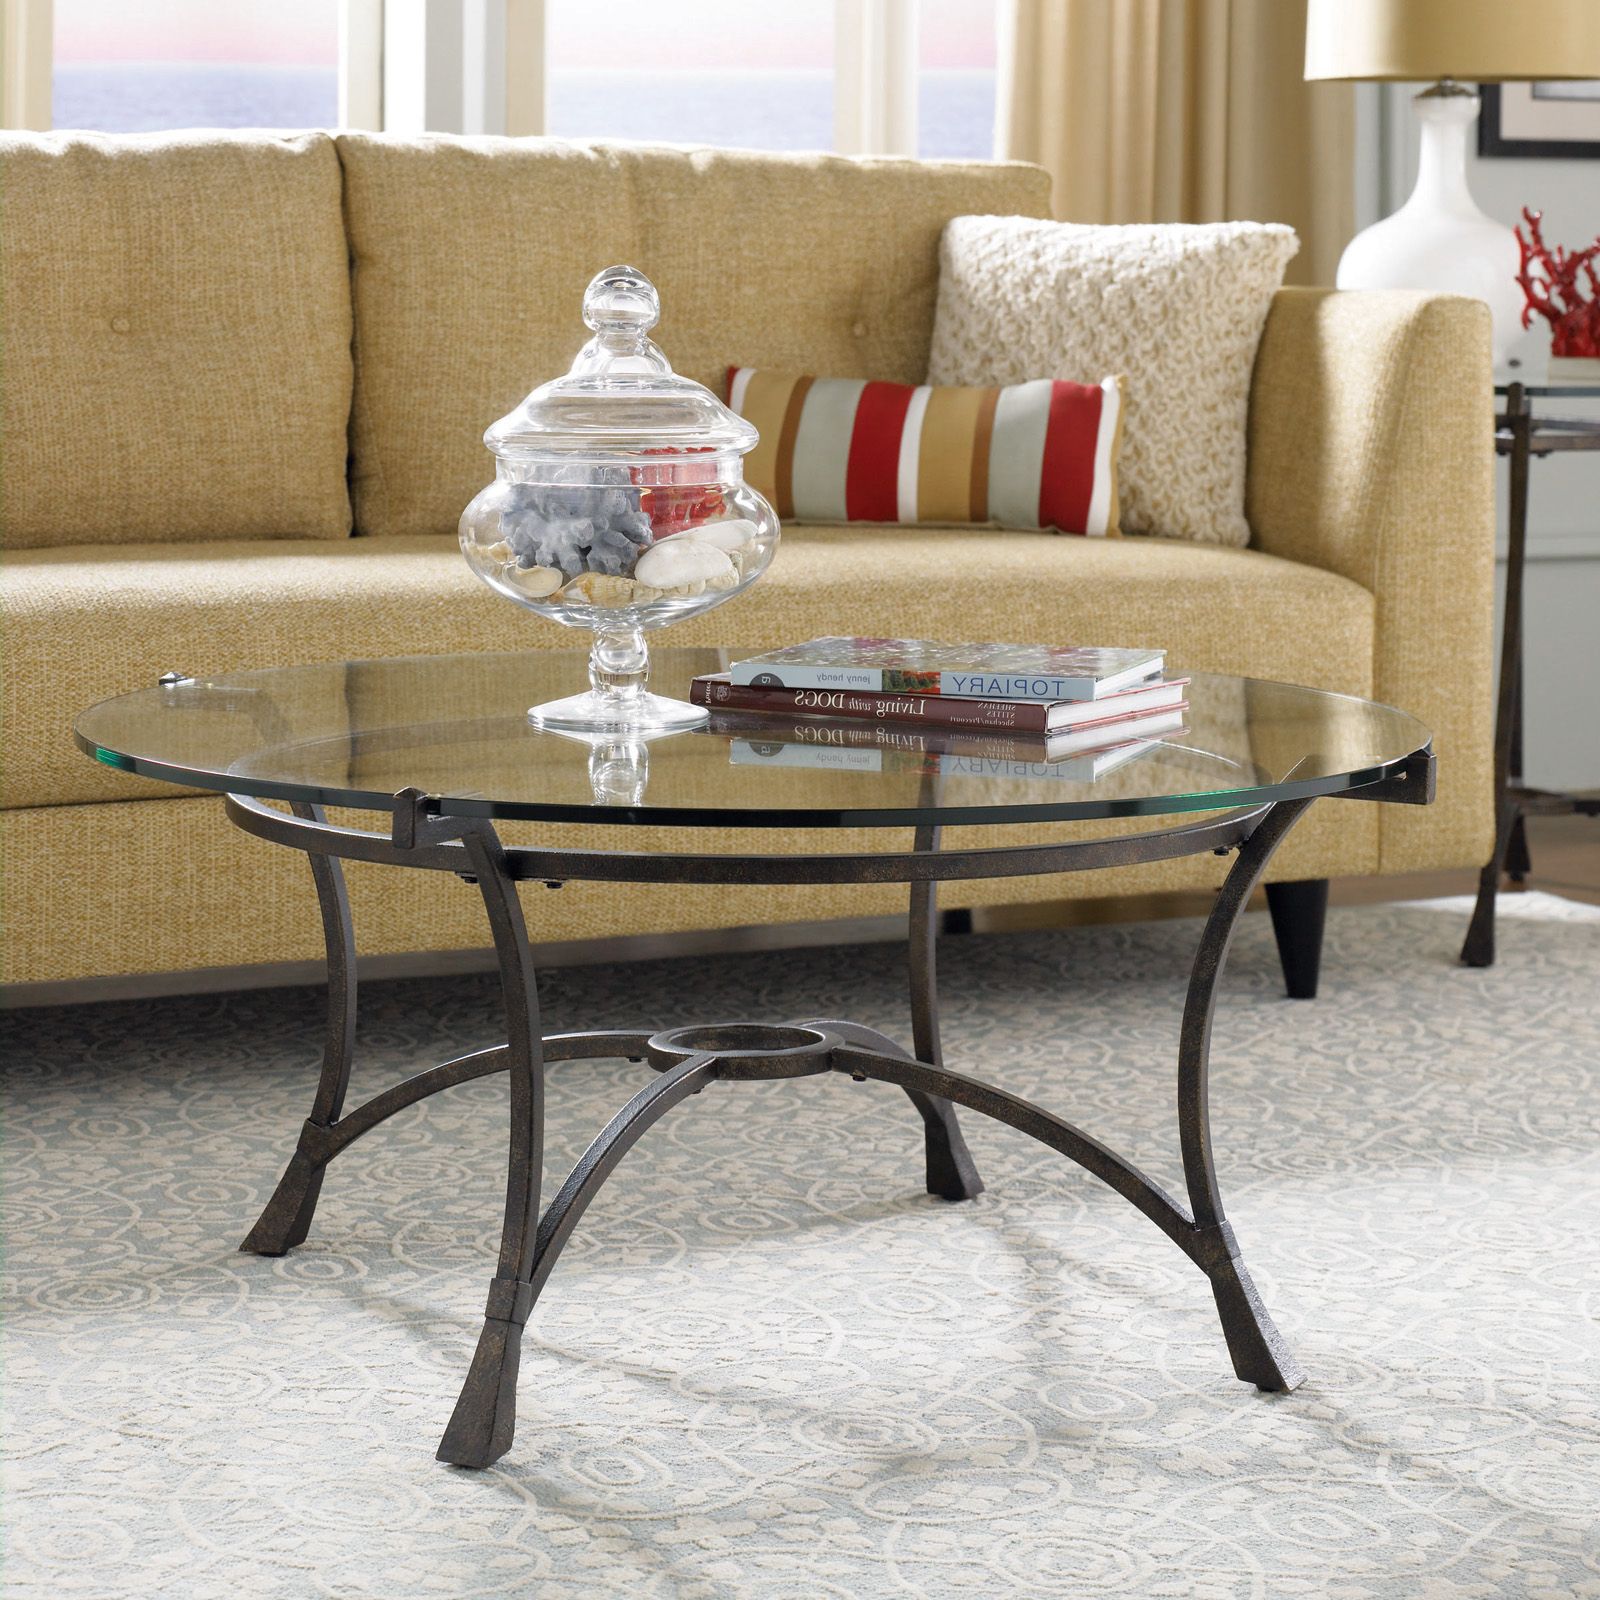 Hammary Sutton Round Glass Top Coffee Table At Hayneedle With Fashionable Glass And Pewter Oval Coffee Tables (Gallery 1 of 20)